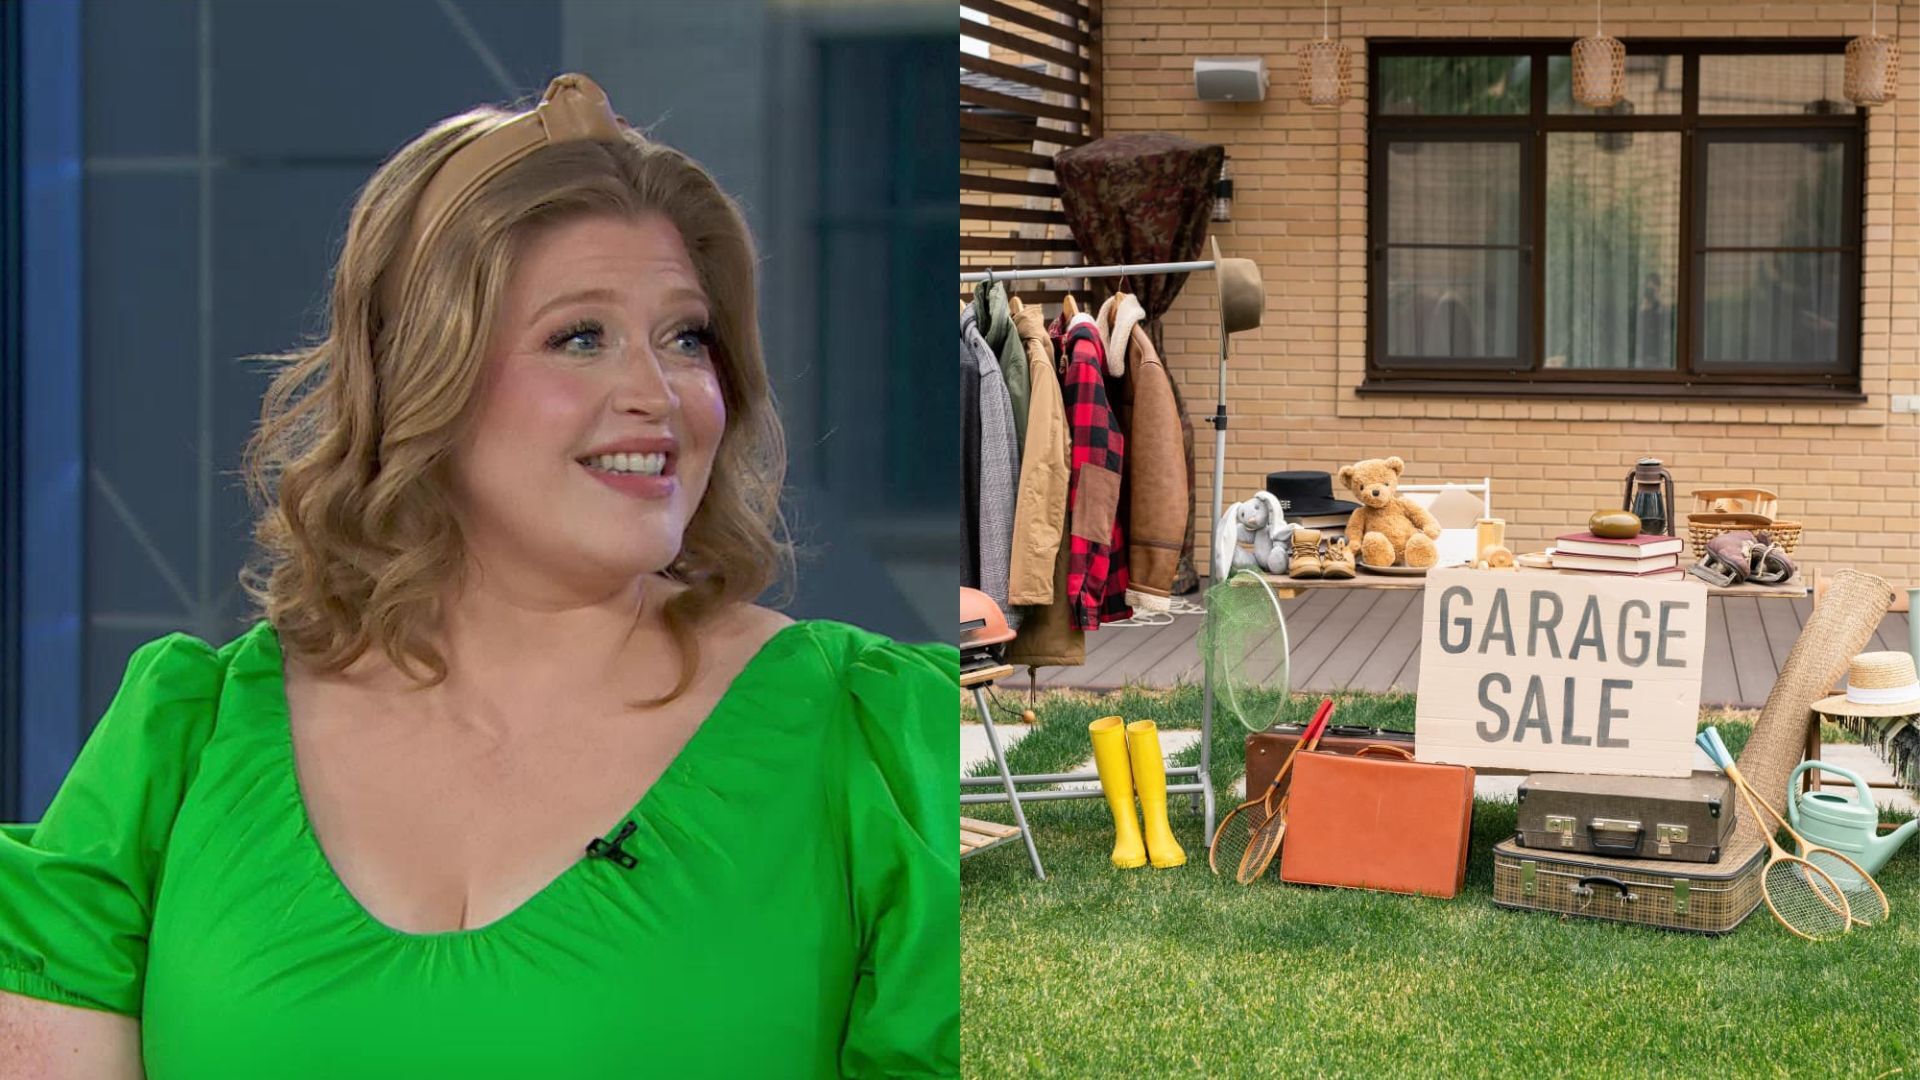 The Super Bowl of yard sales is happening this weekend (and over 50 houses are getting involved)